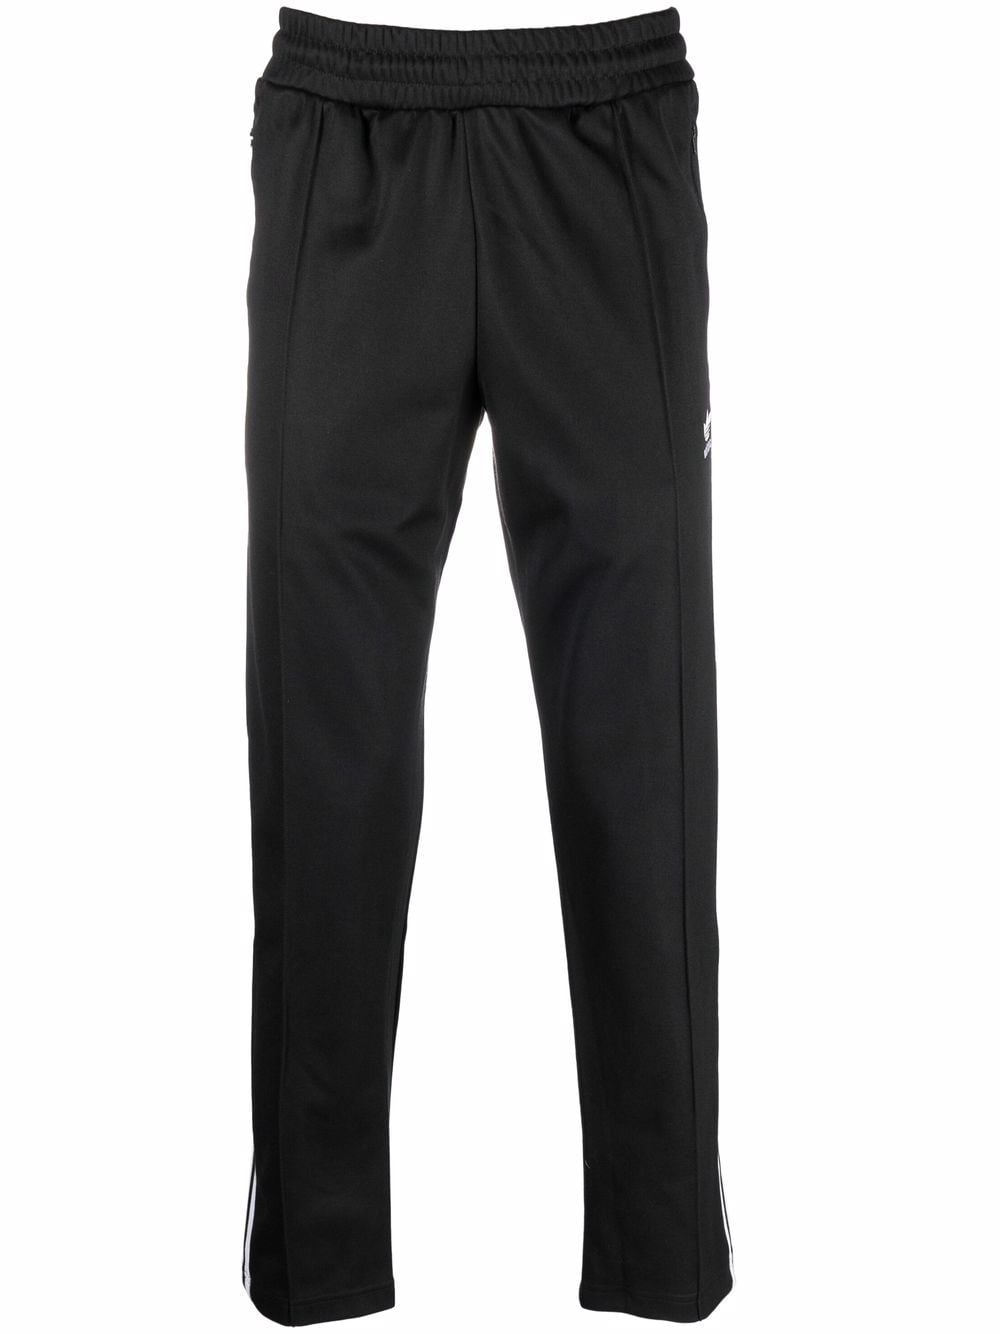 Adidas 100% Polyester Black Track Pants Size L - 63% off